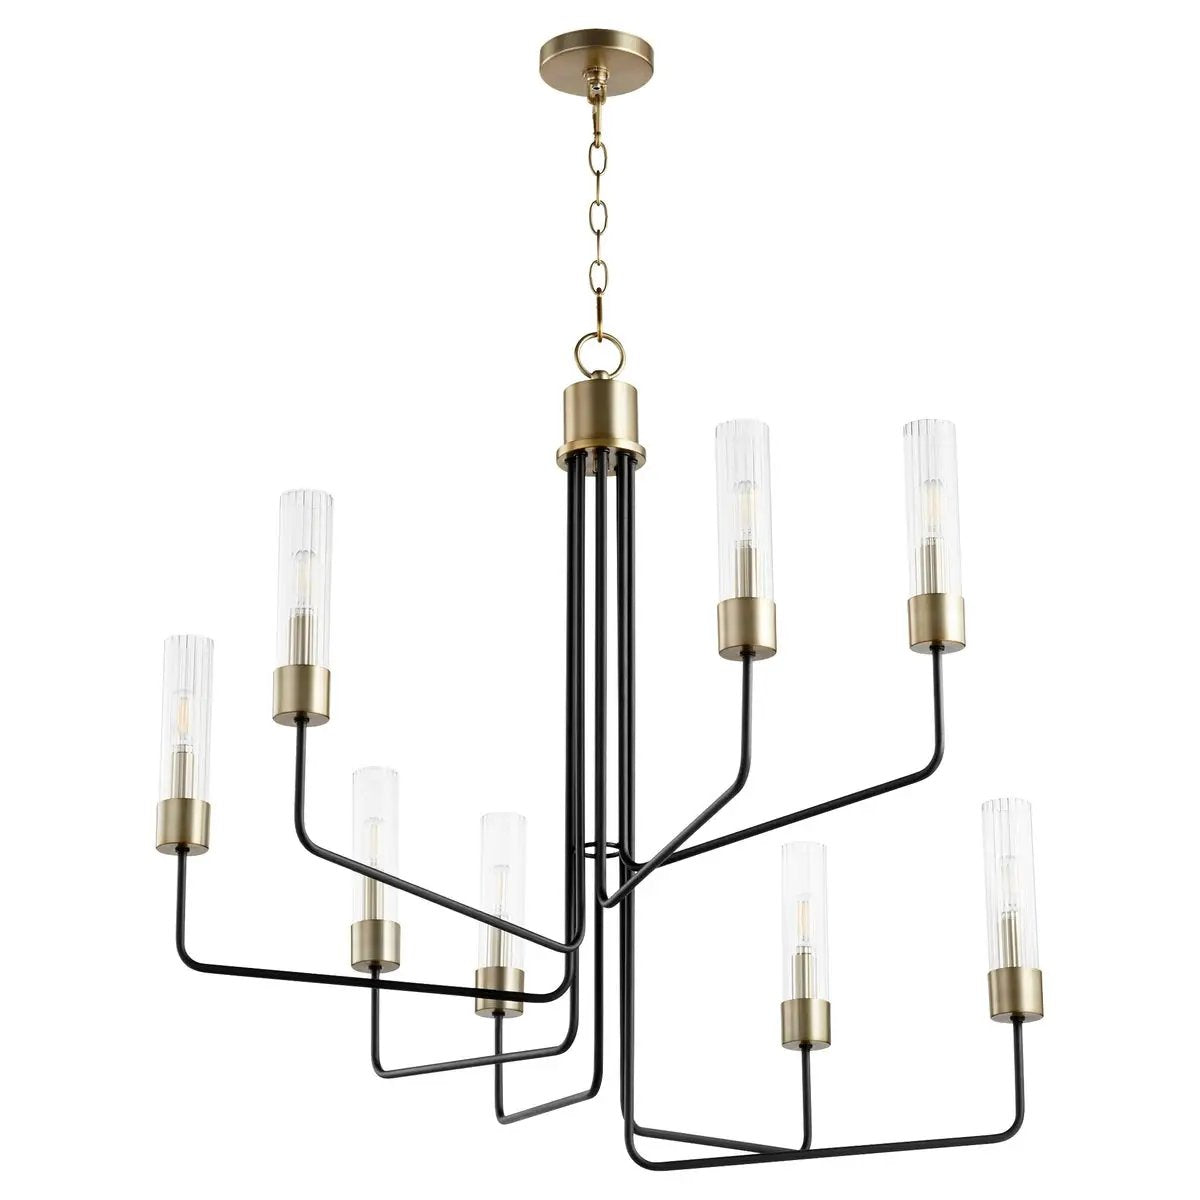 Transitional chandelier with clear glass bulbs and tubes, featuring a linear frame and soft-angular curves. Two-toned aged brass and noir finish. Suitable for indoor and outdoor spaces. Adjustable chain/stem hung suspension system. 34.5&quot;W x 33.5&quot;H. Quorum International.